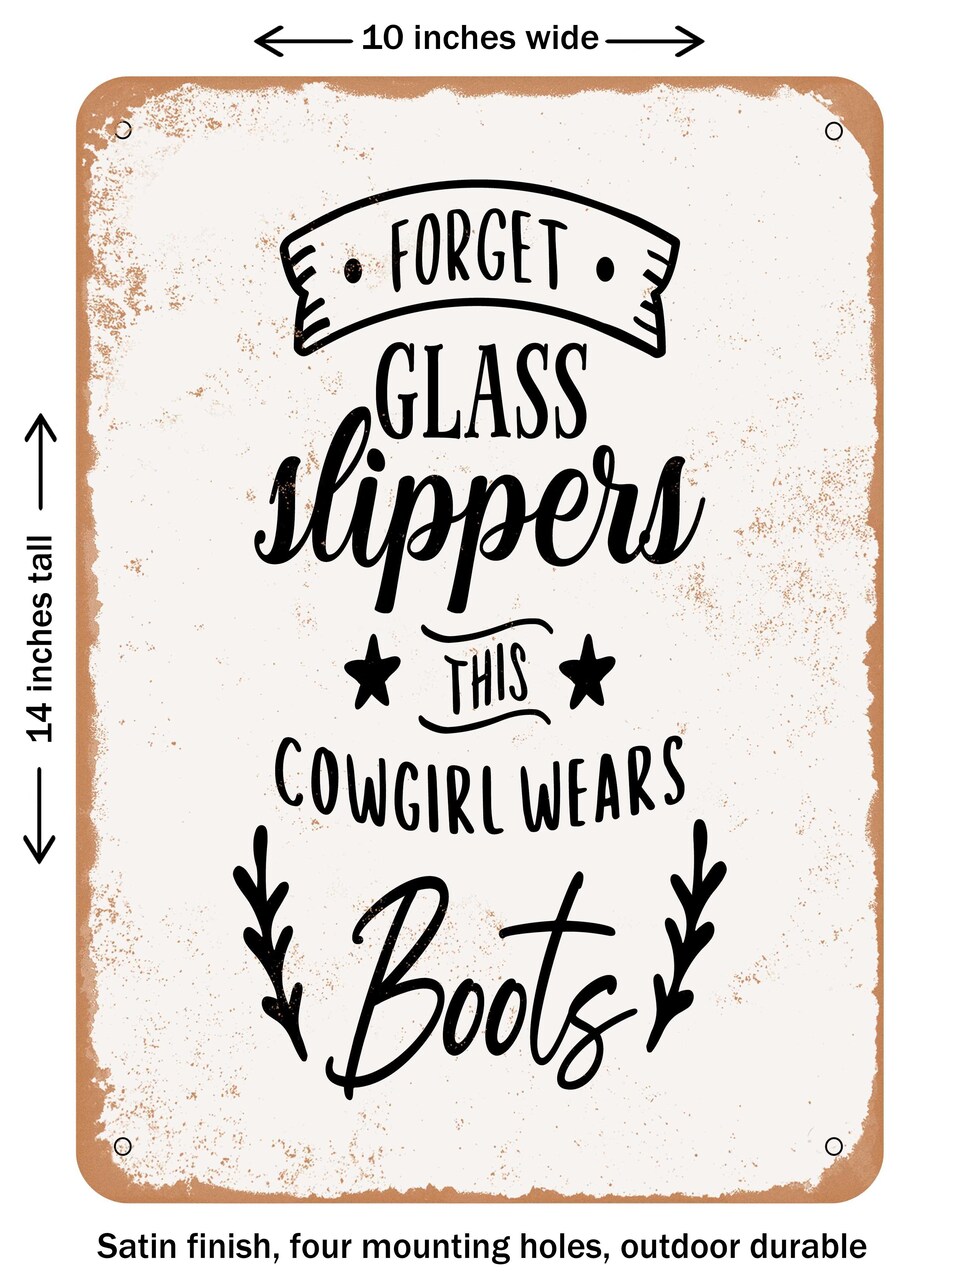 DECORATIVE METAL SIGN - Forget Glass Slippers This Cowgirl Wears Boots - 2  - Vintage Rusty Look